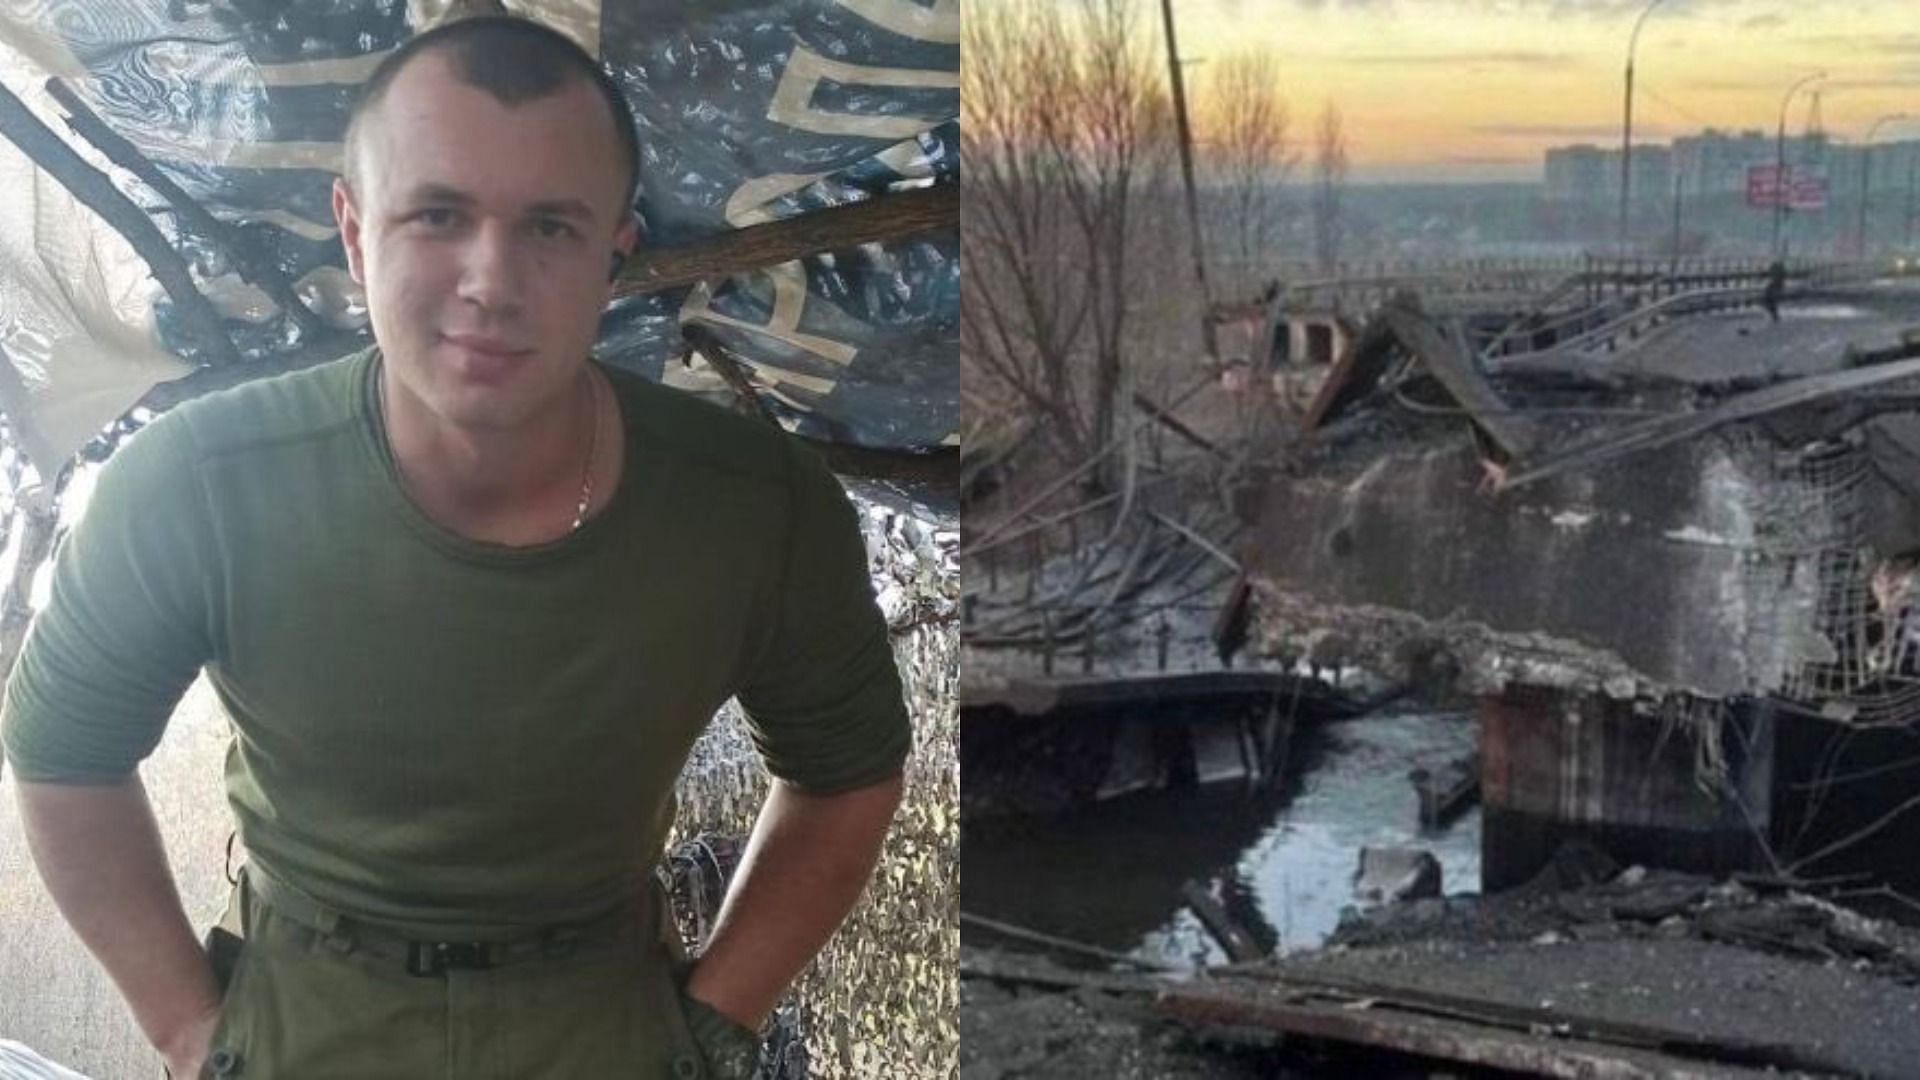 Ukrainian soldier Vitaly Shakun blew himself up along with the Henichesk Bridge to stop Russian troops (Image via Neavah and Alberto Samper/Twitter)